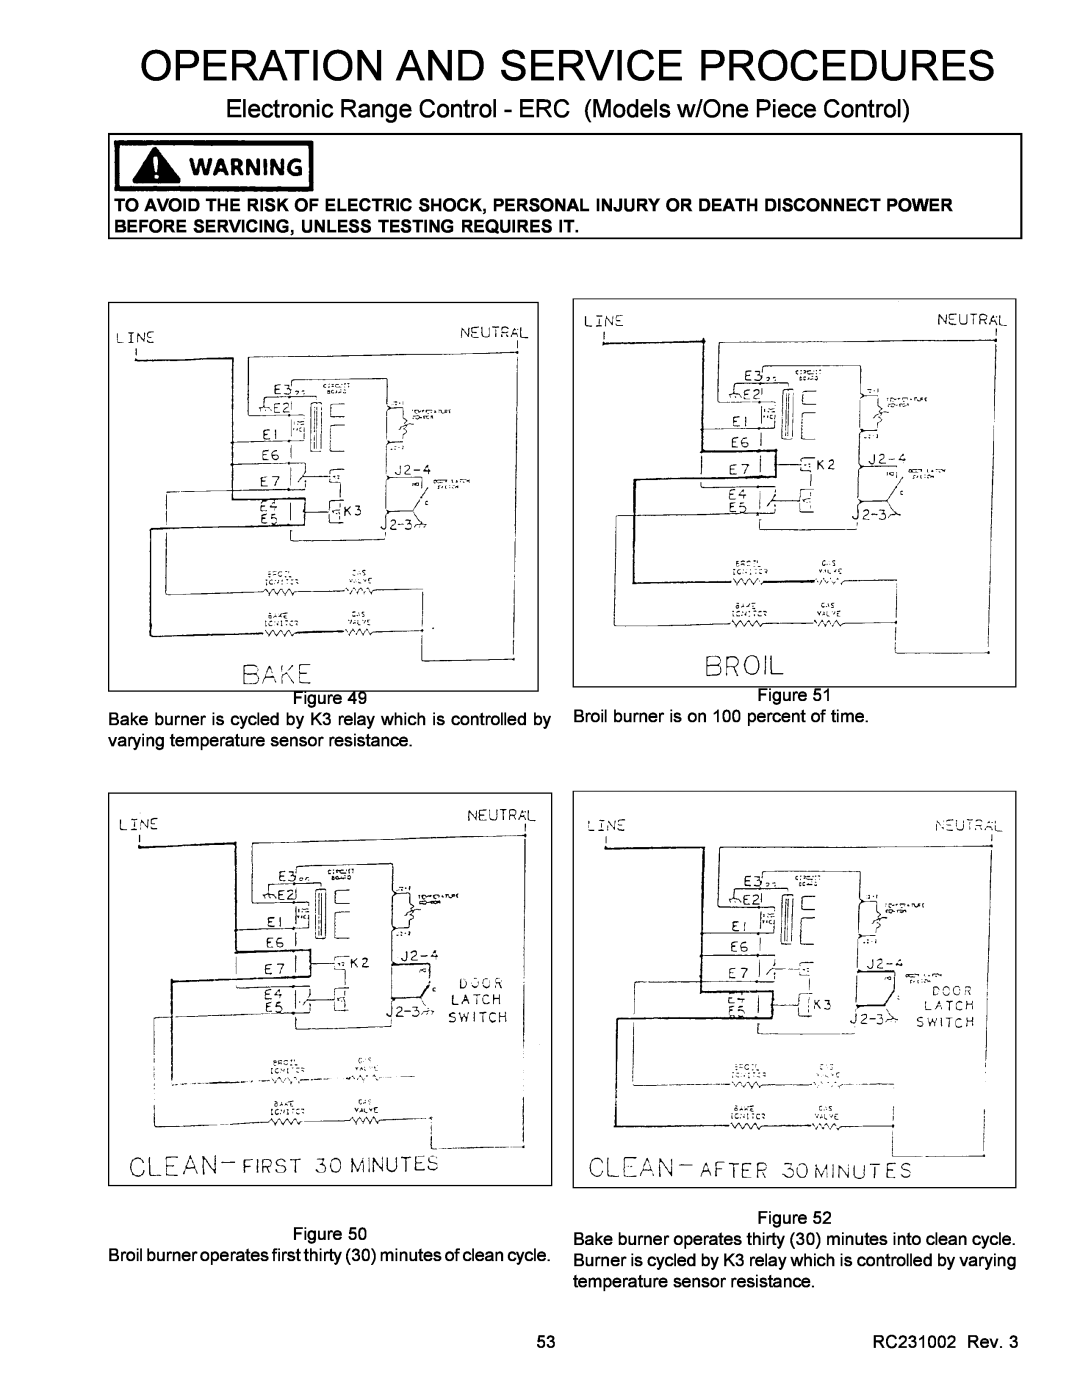 Amana RSS, RST service manual Operation And Service Procedures, Electronic Range Control - ERC Models w/One Piece Control 